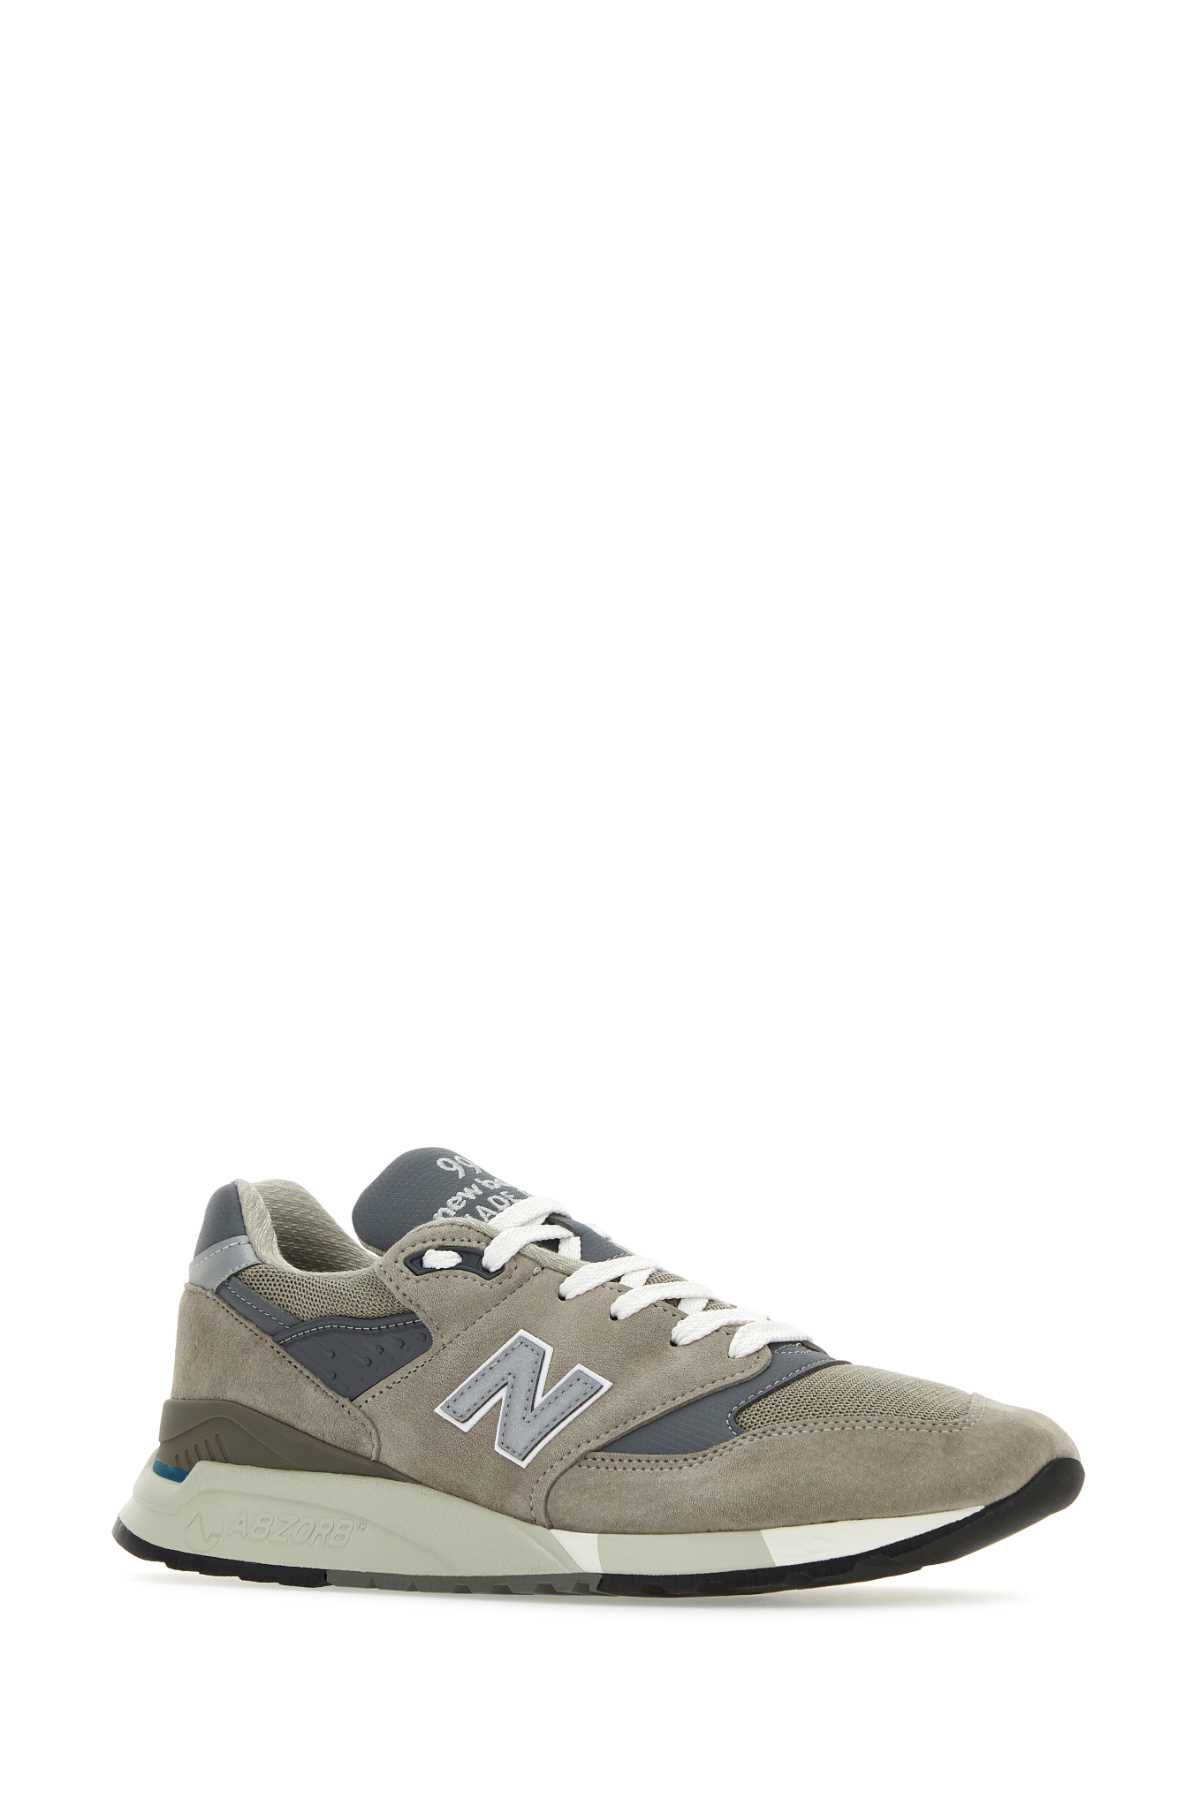 New Balance Multicolor Suede And Fabric U998gr Sneakers In Grey